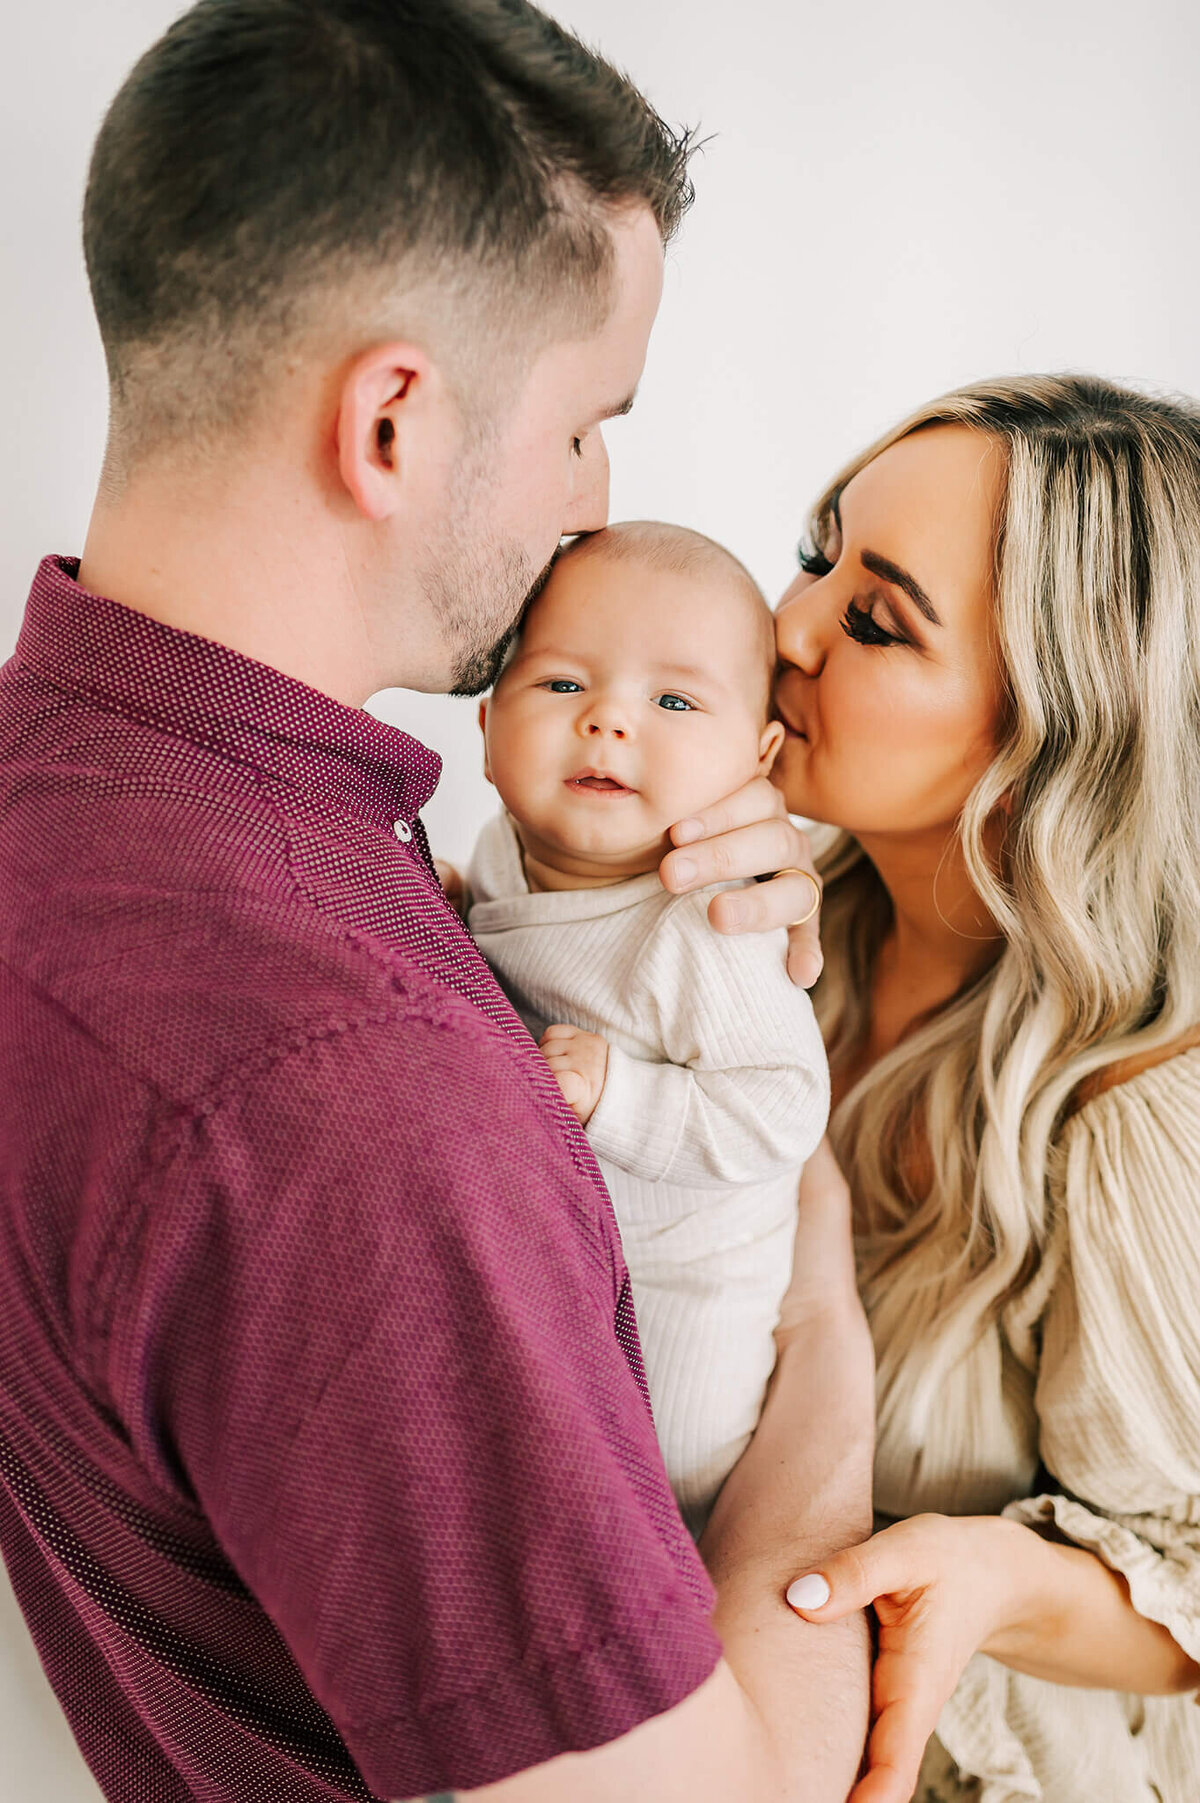 Springfield MO family photographer The XO Photography captures parents kissing baby boy on forehead